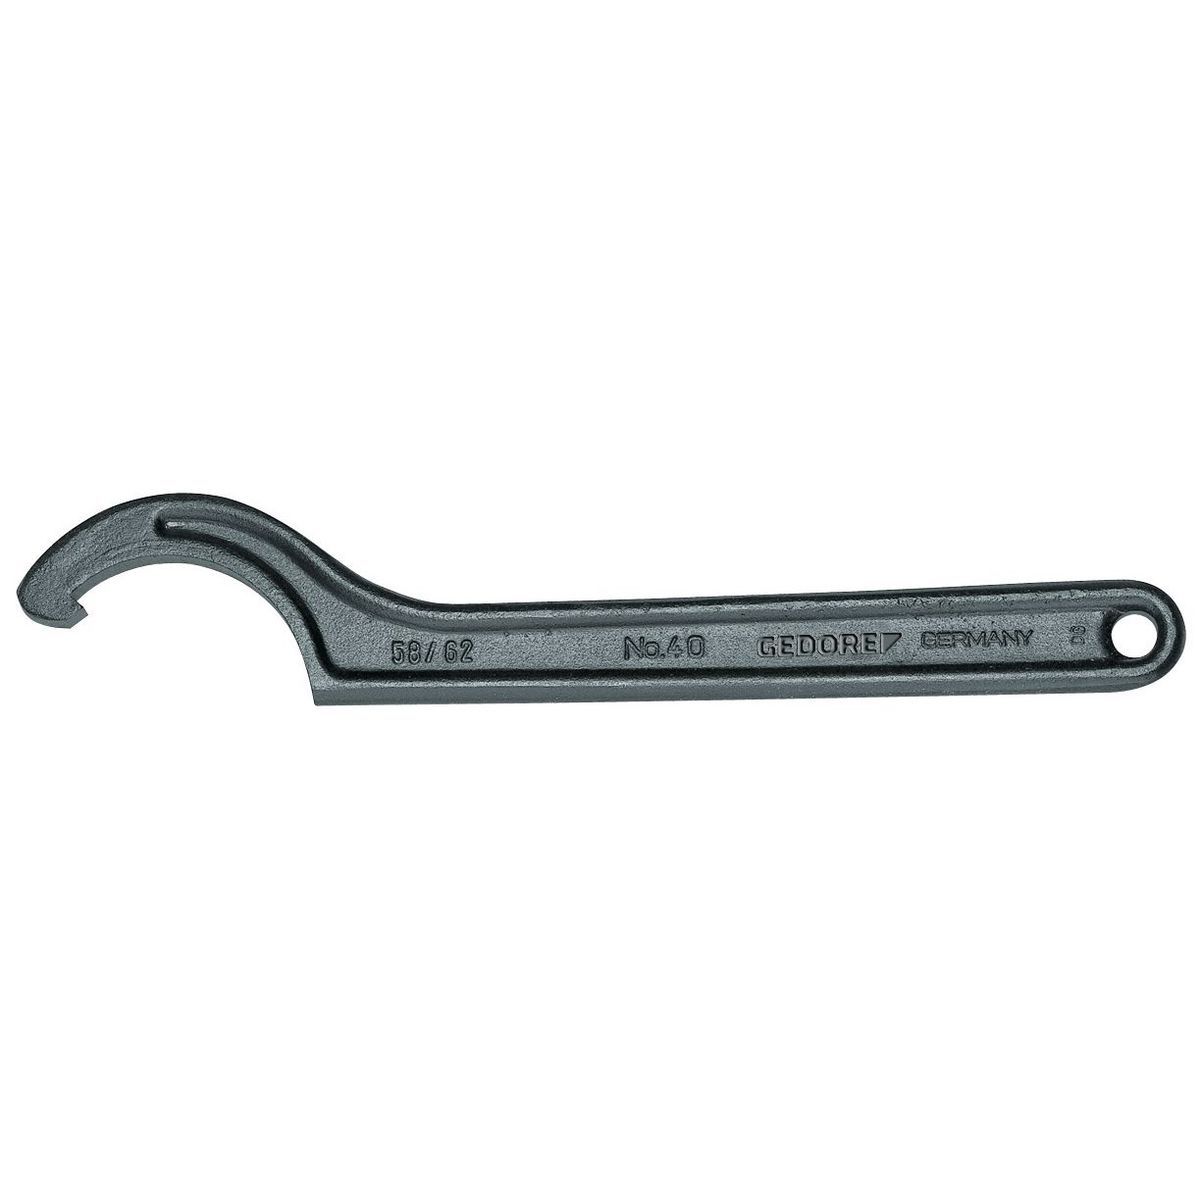 Hook wrench with lug, 58-62mm No.40 58-62 Gedore